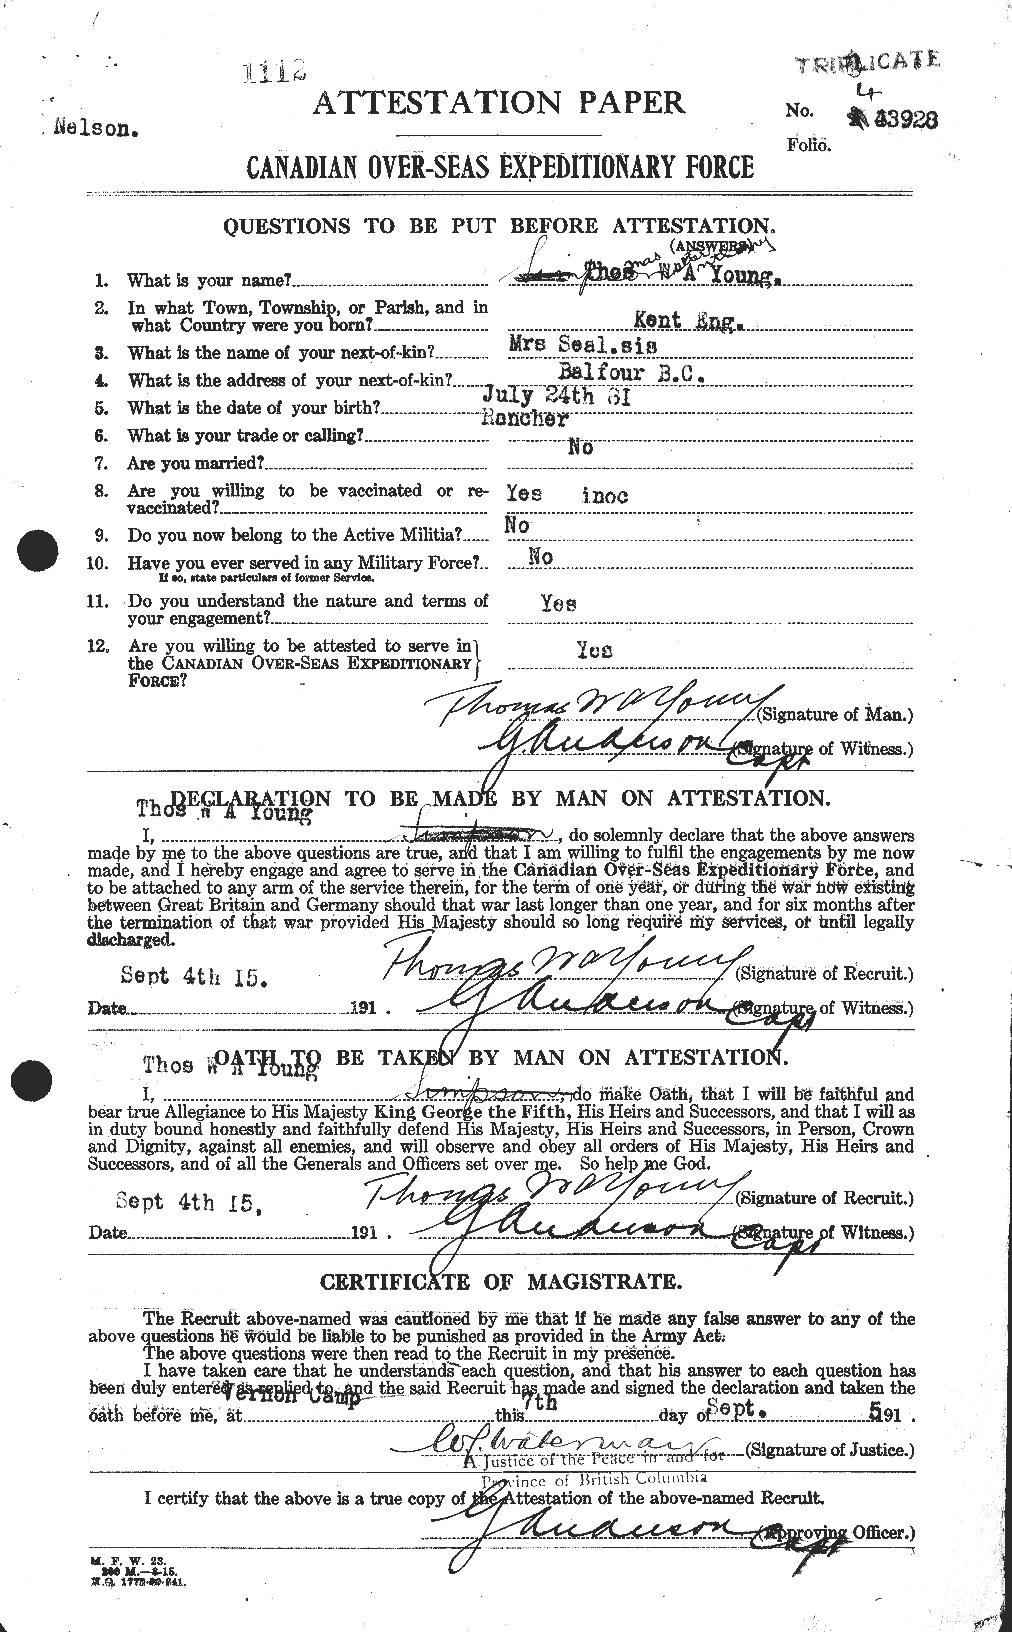 Personnel Records of the First World War - CEF 692417a